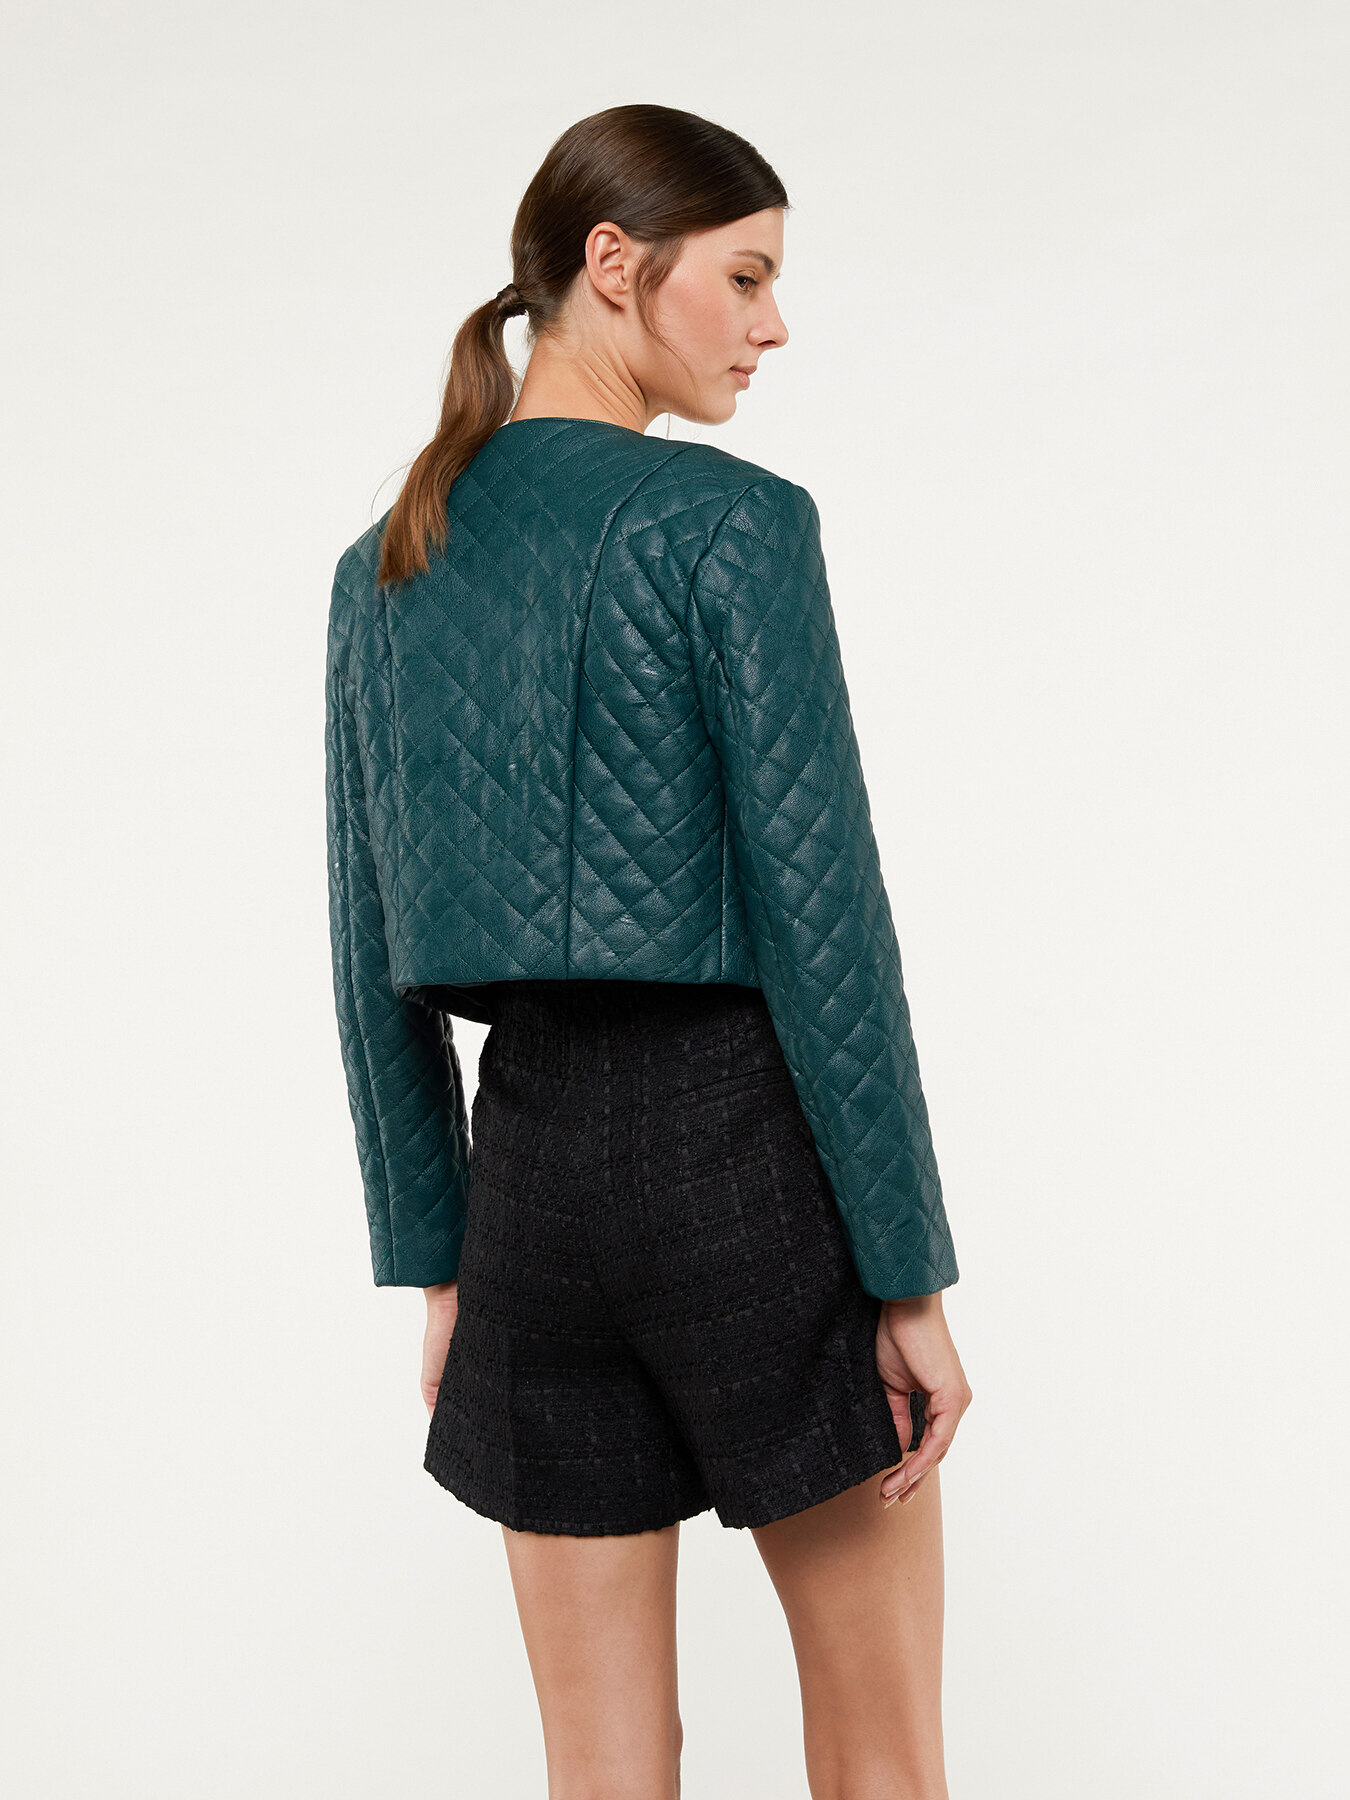 Quilted faux leather bolero jacket